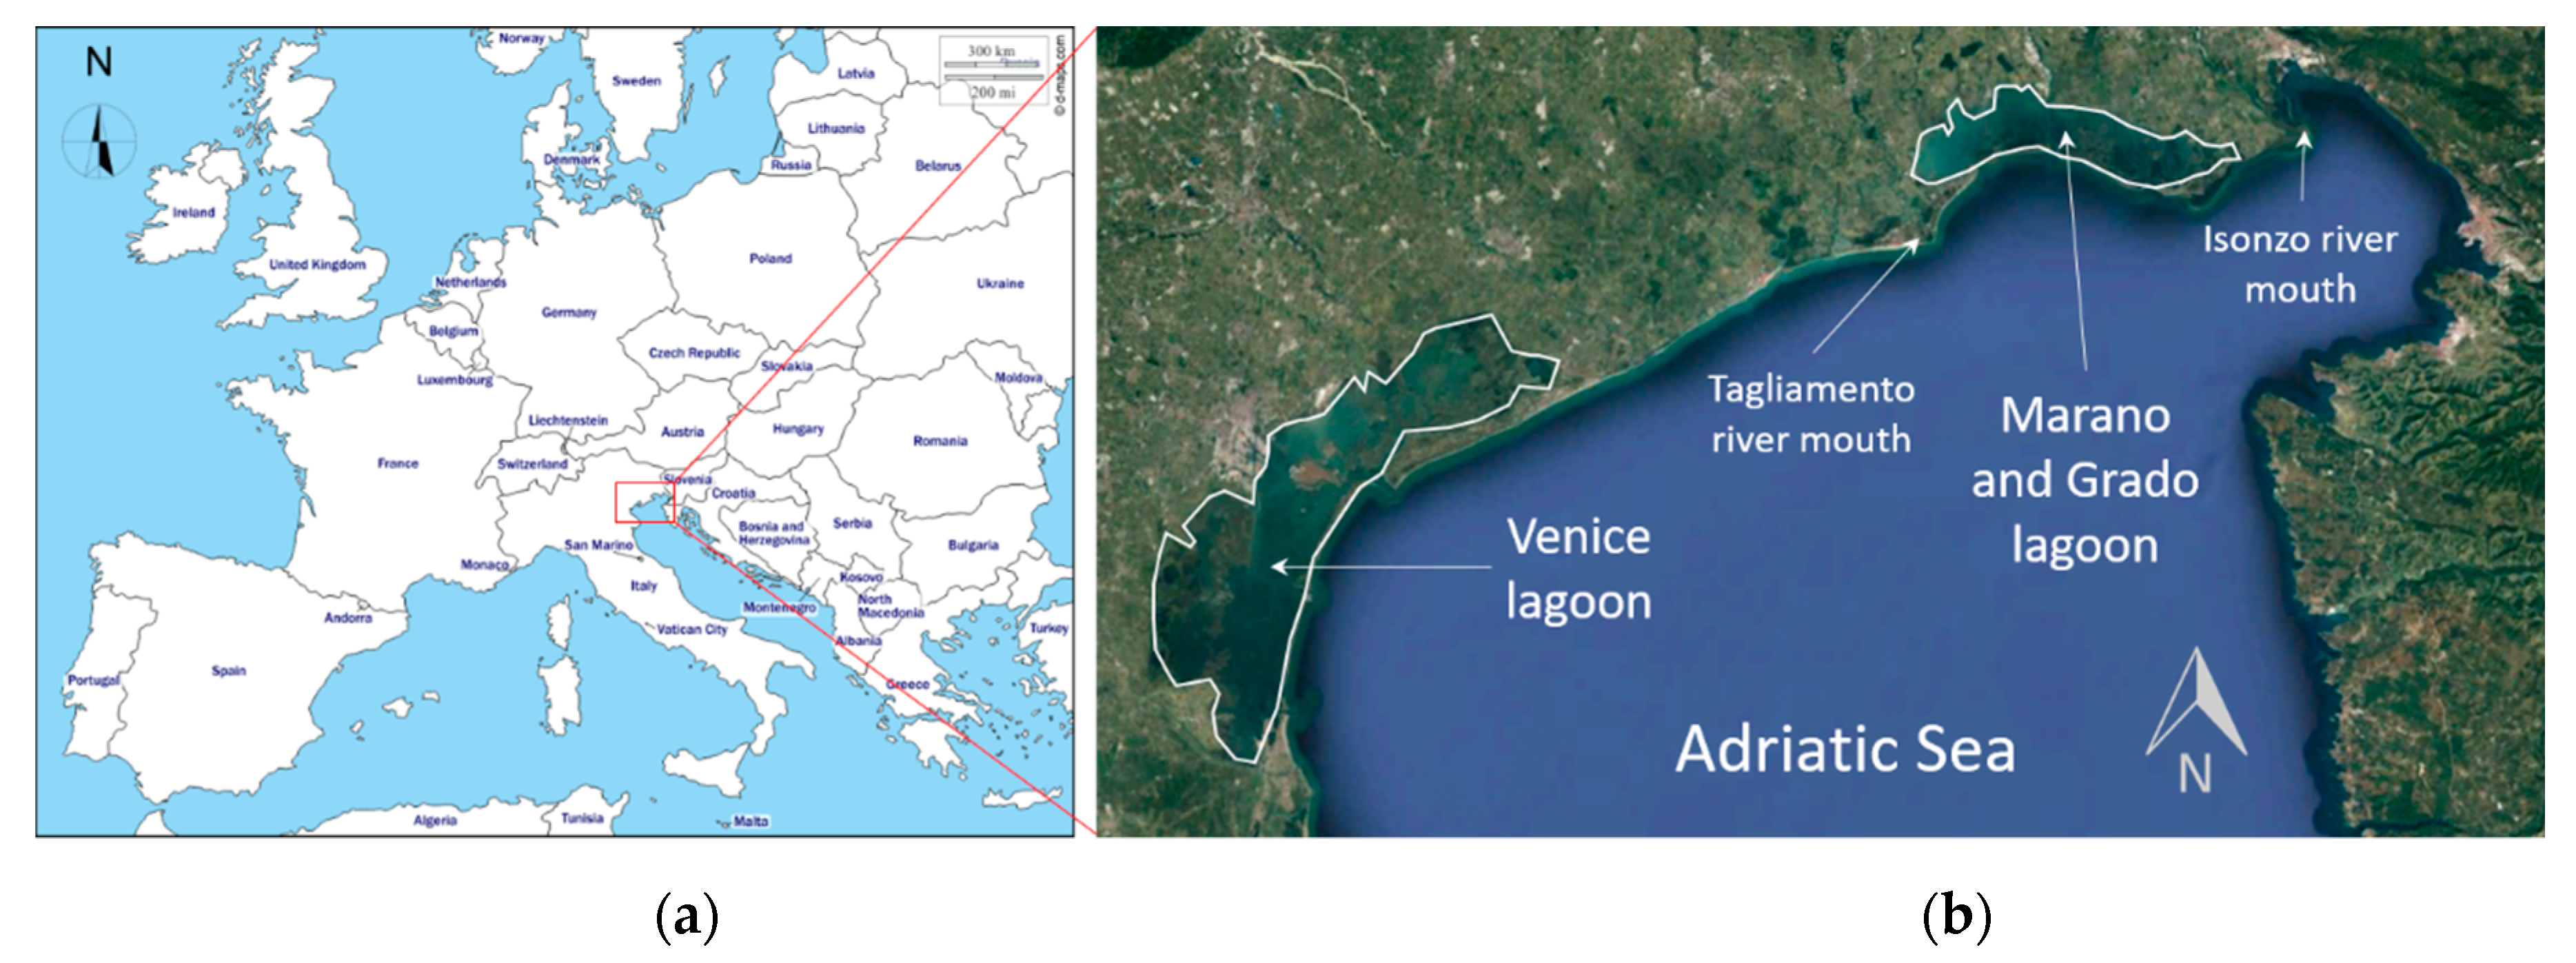 JMSE | Free Full-Text | An Integrated Approach to Study the Morphodynamics  of the Lignano Tidal Inlet